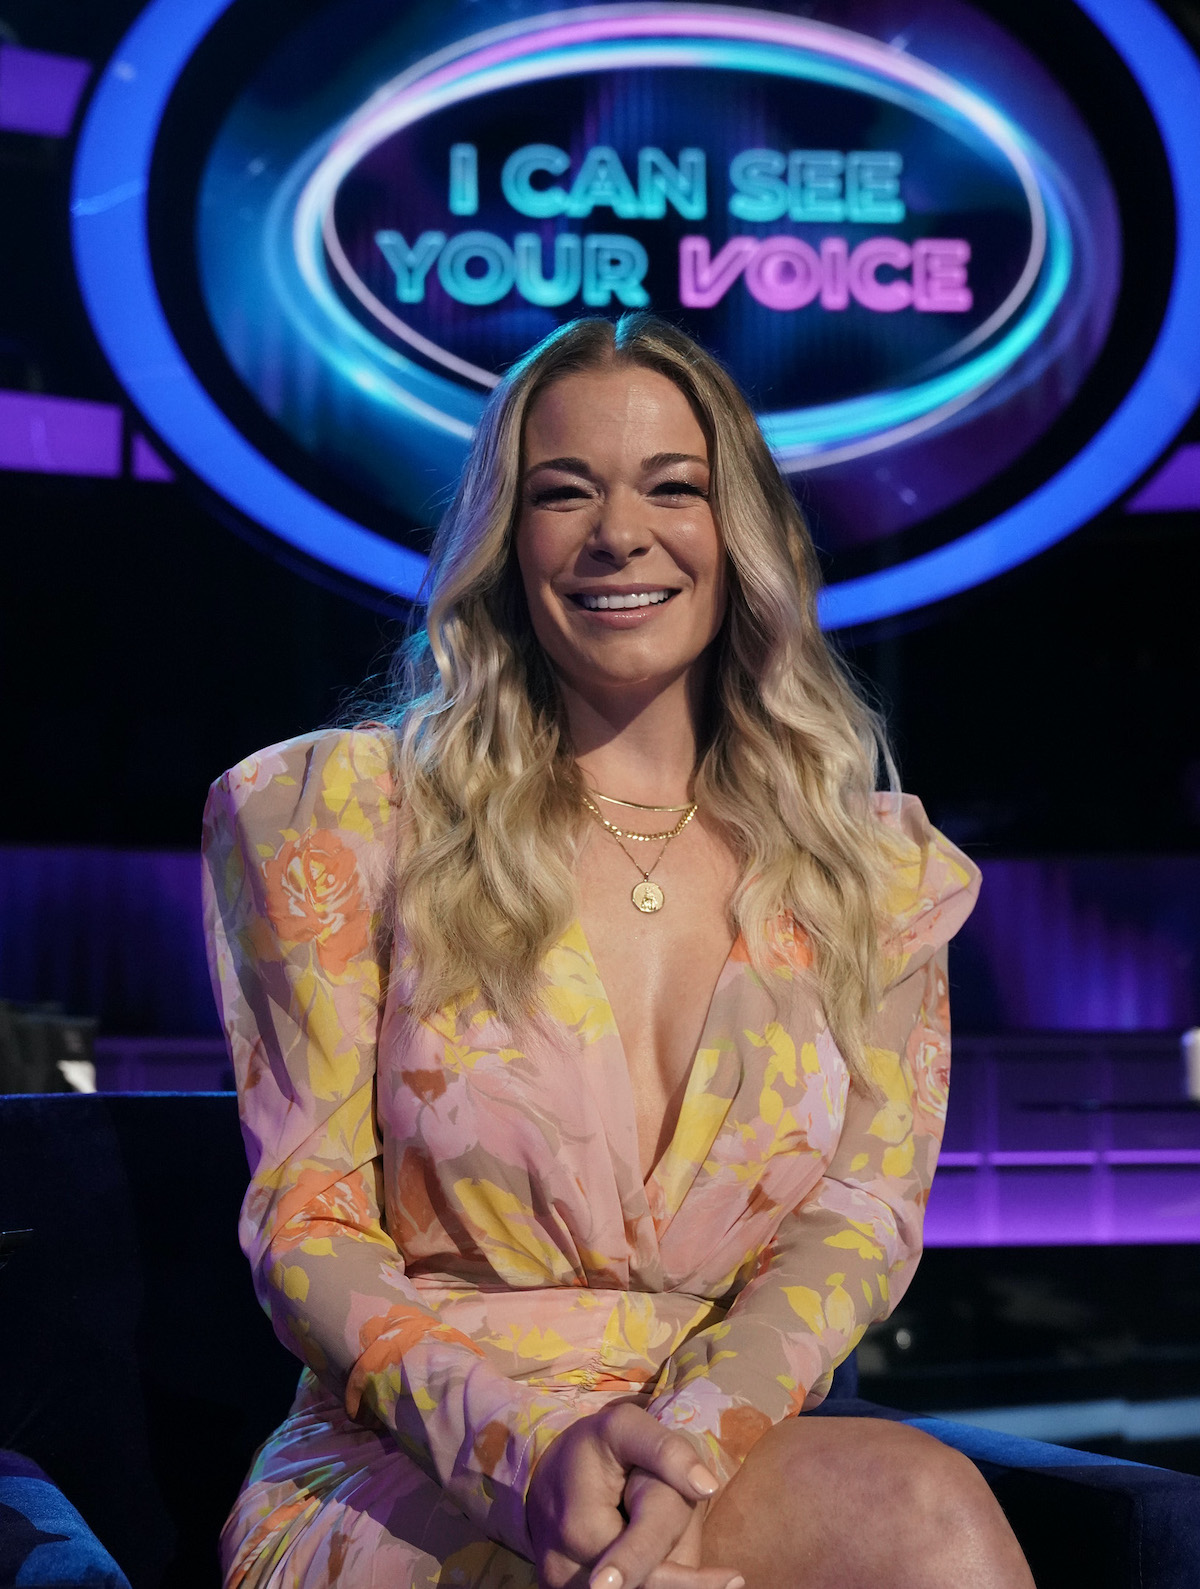 LeAnn Rimes on I Can See Your Voice